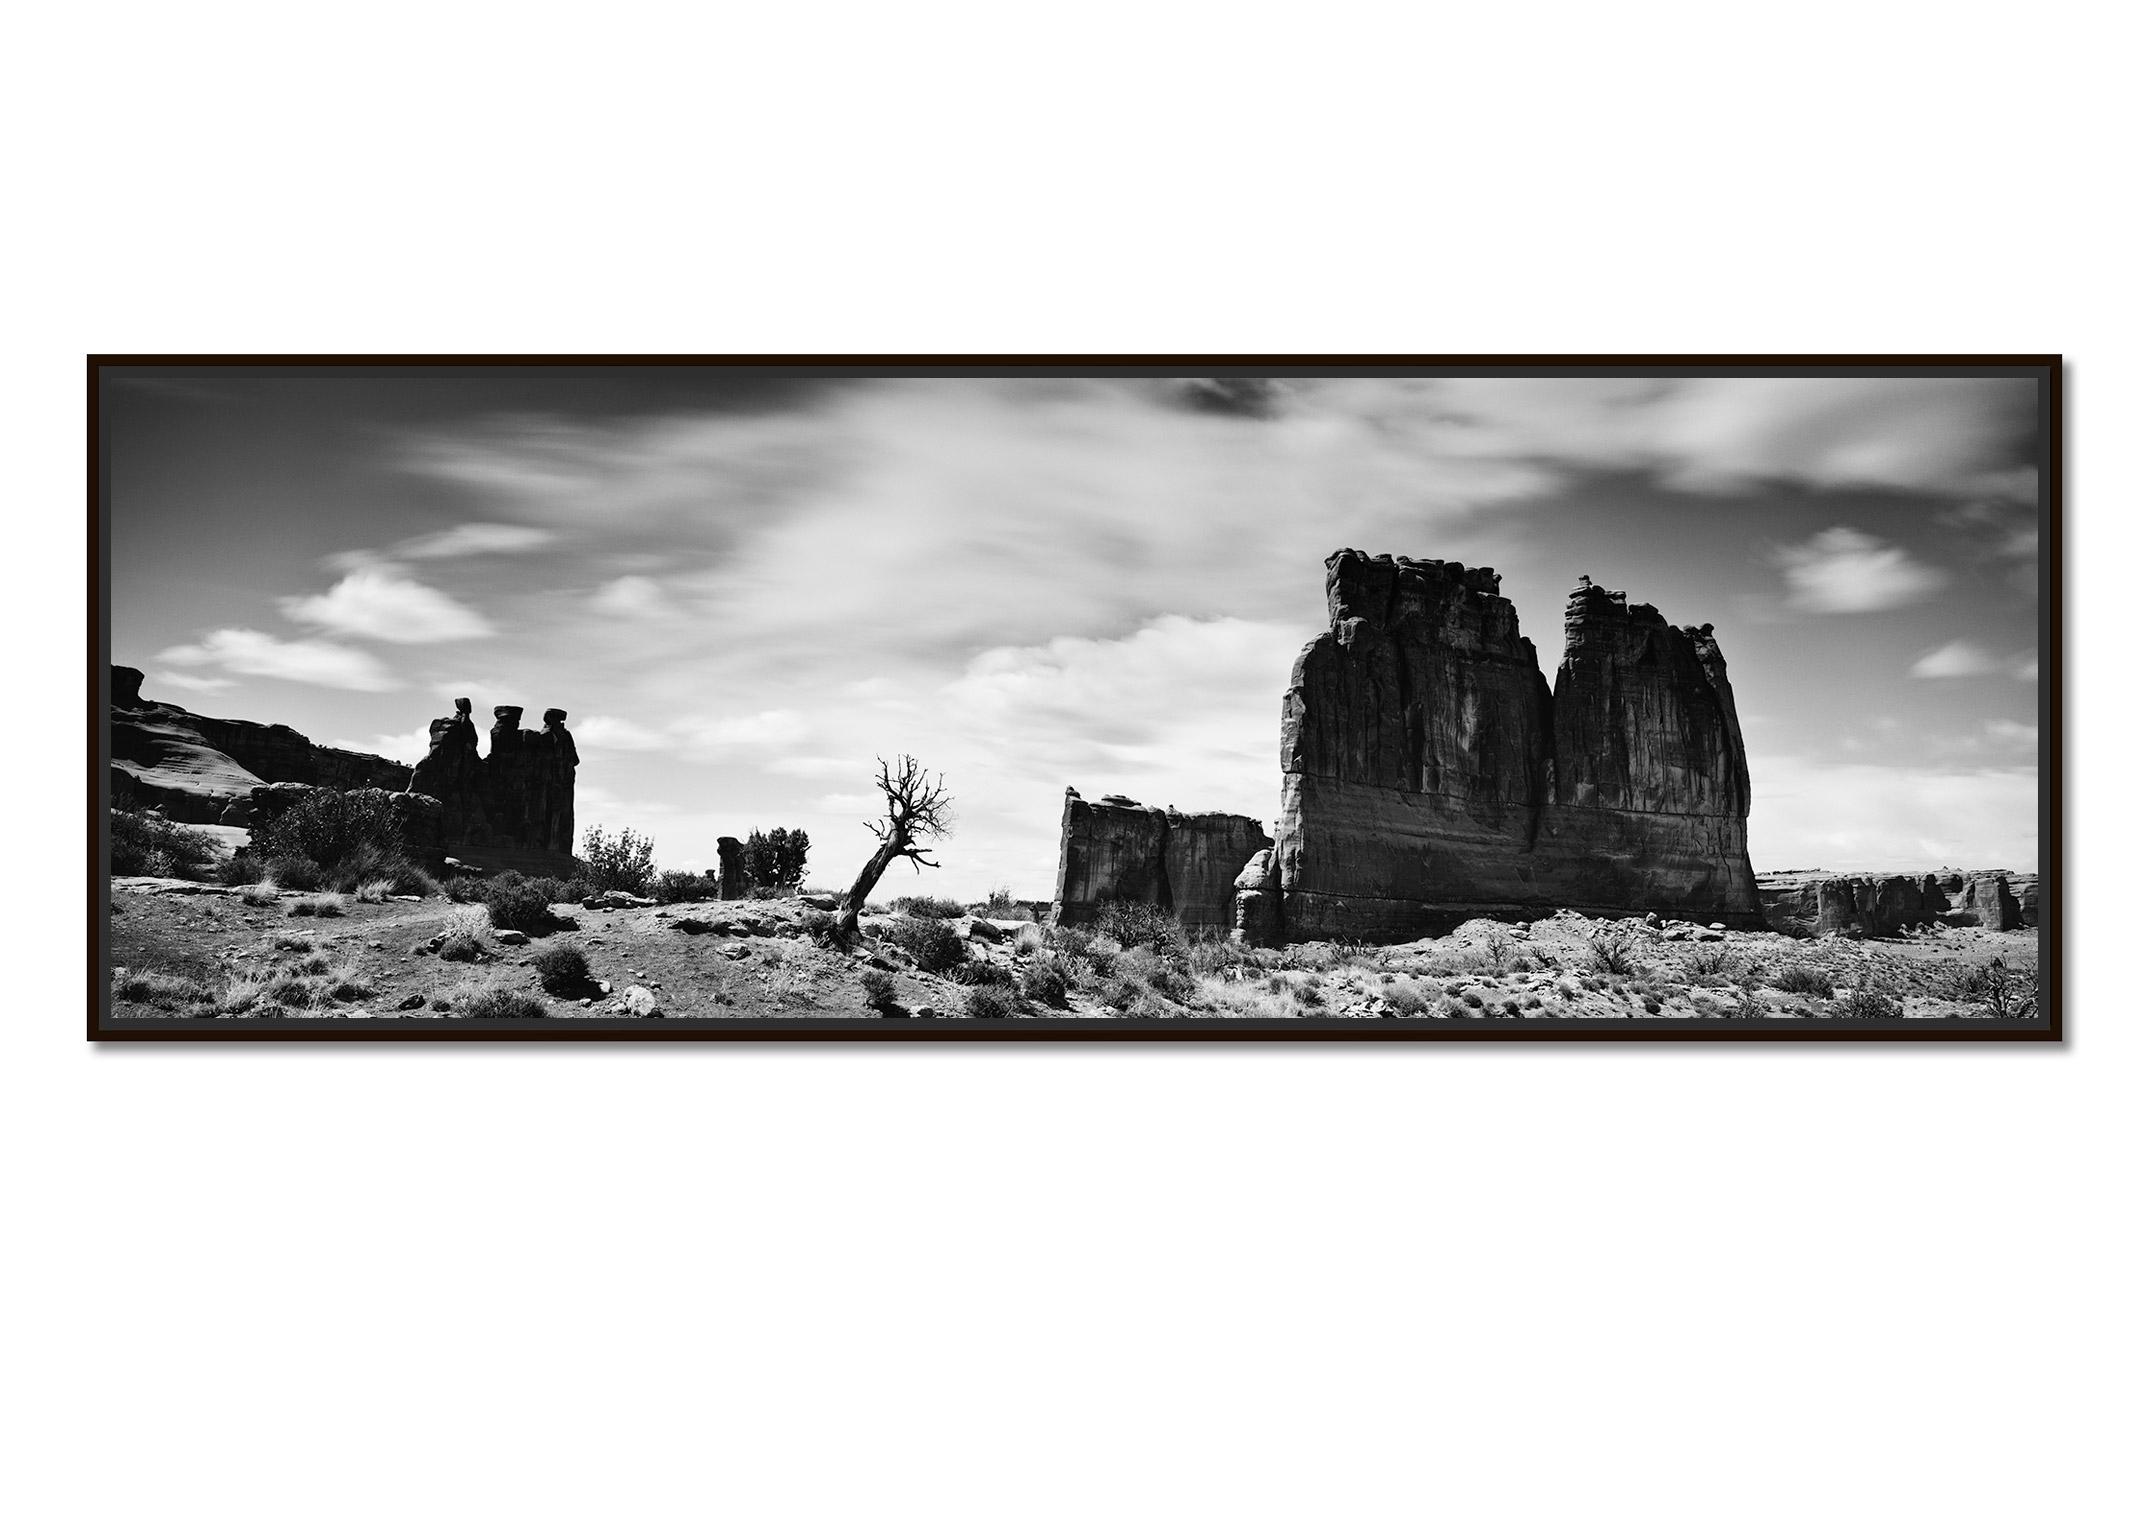 Wild West Panorama, Arches Park, Utah, USA, black & white landscape photography - Photograph by Gerald Berghammer